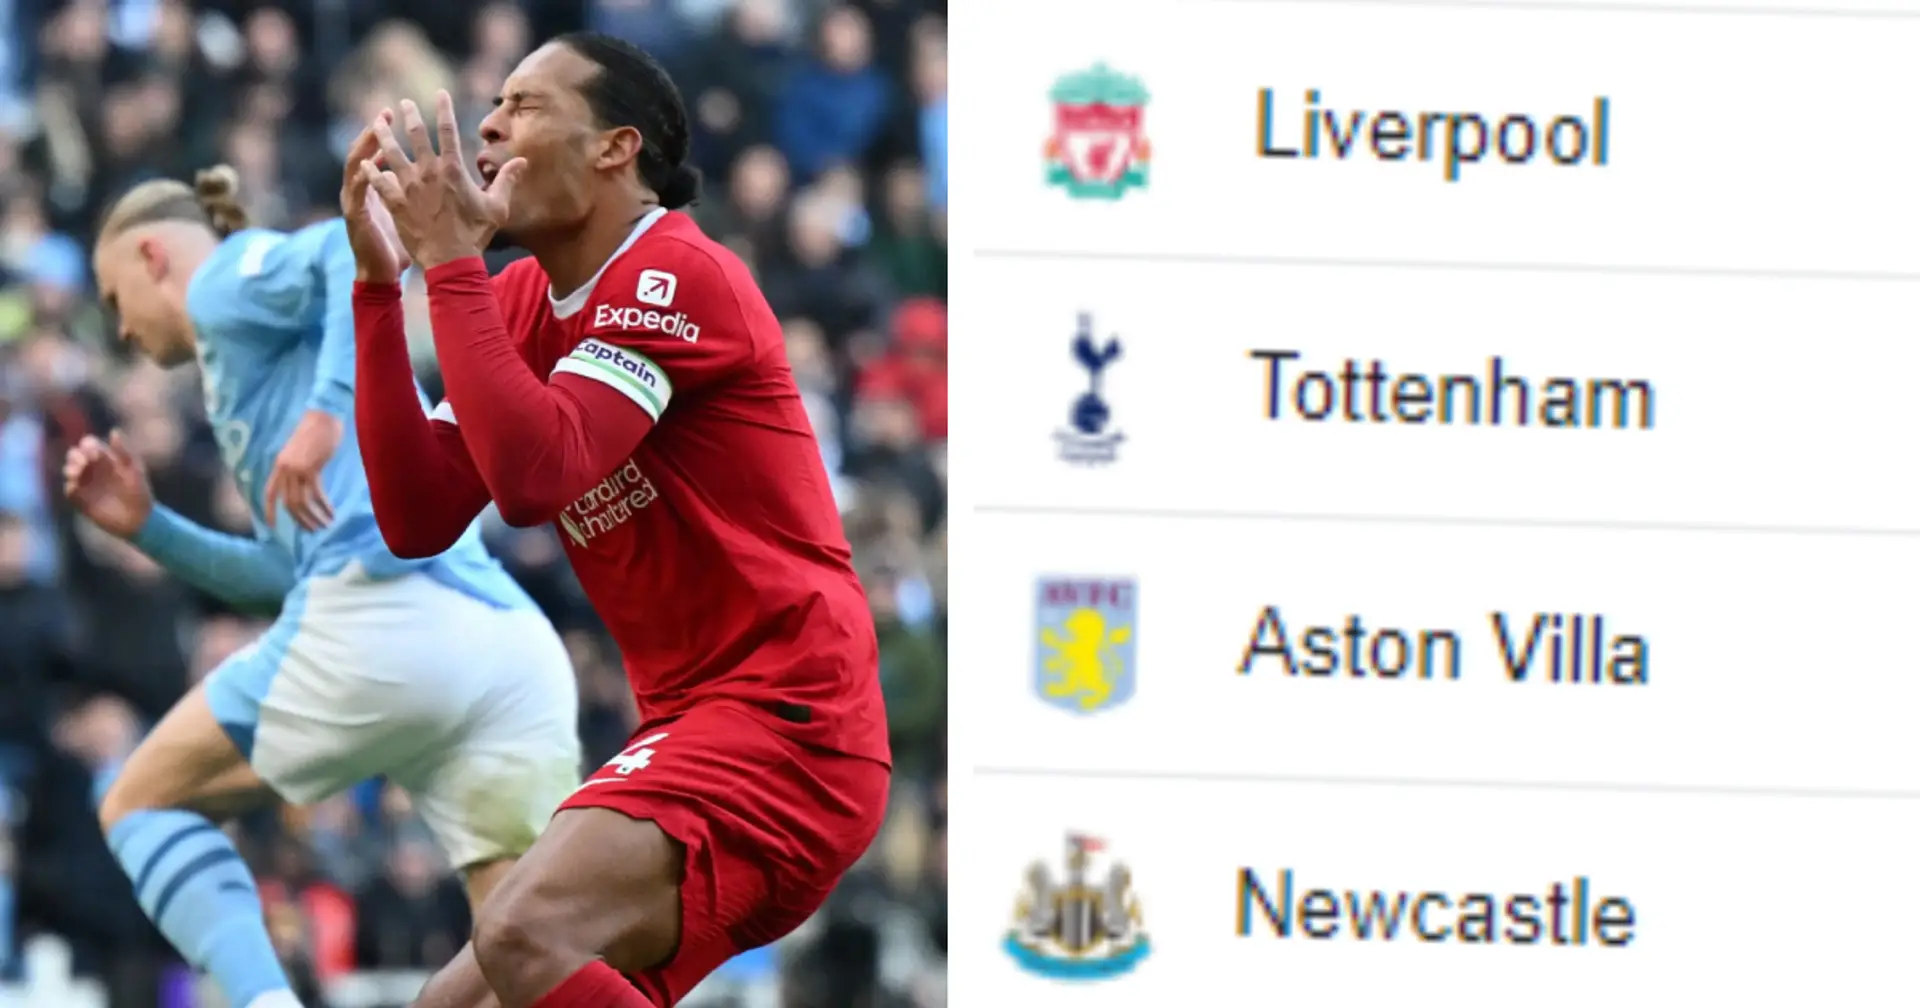 Liverpool down to third: updated Premier League table after Saturday games